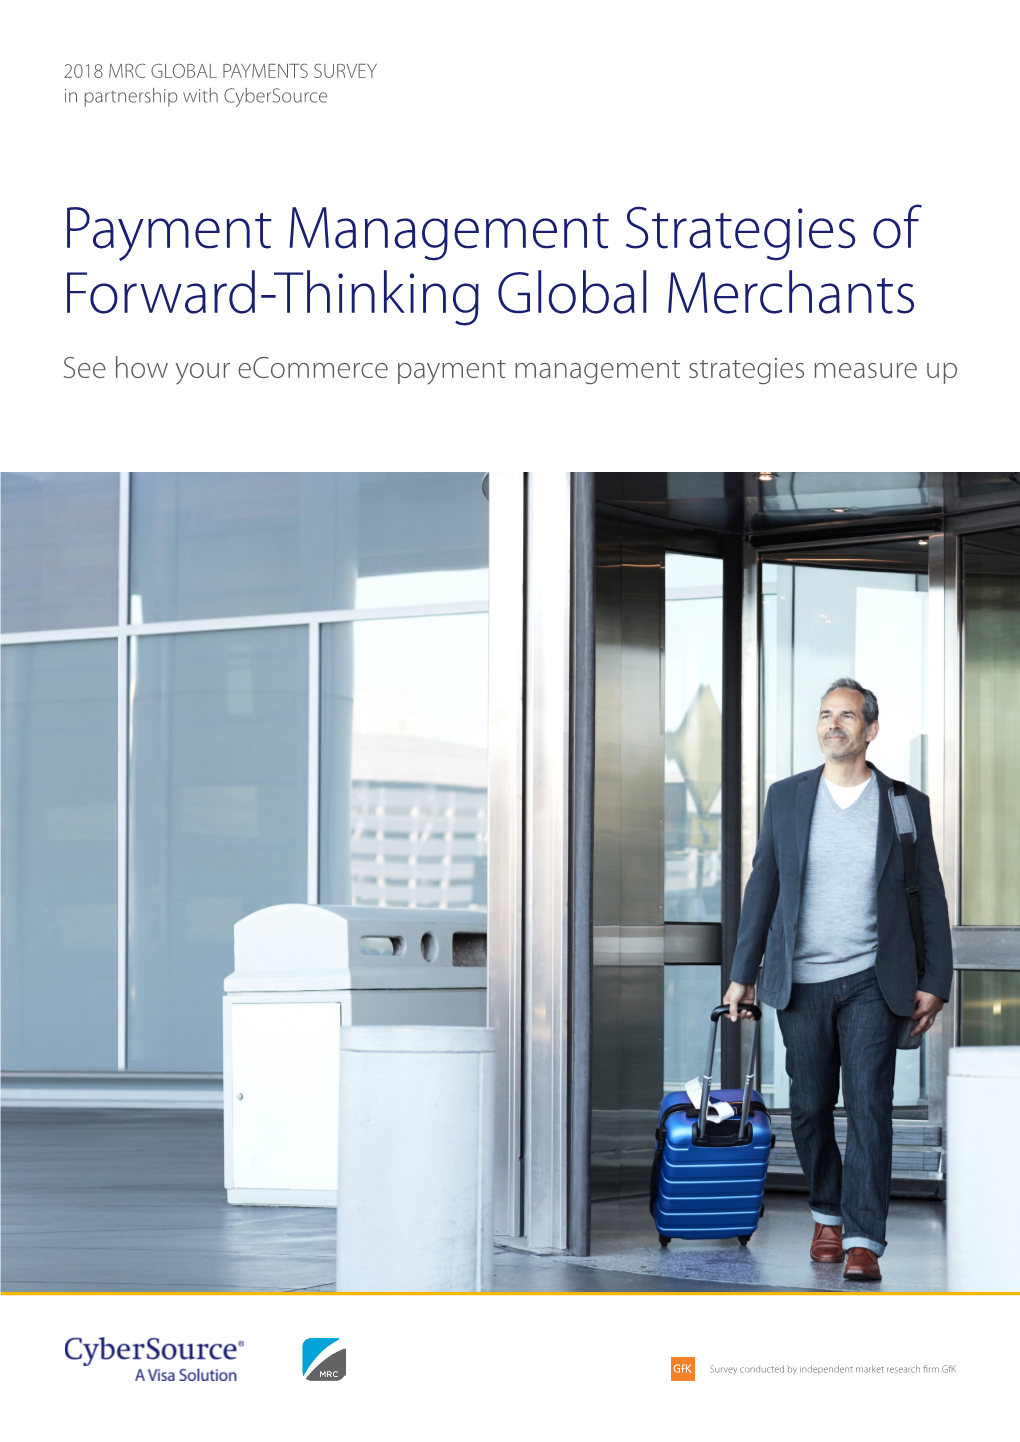 Payment Management Strategies of Forward-Thinking Global Merchants See How Your Ecommerce Payment Management Strategies Measure Up